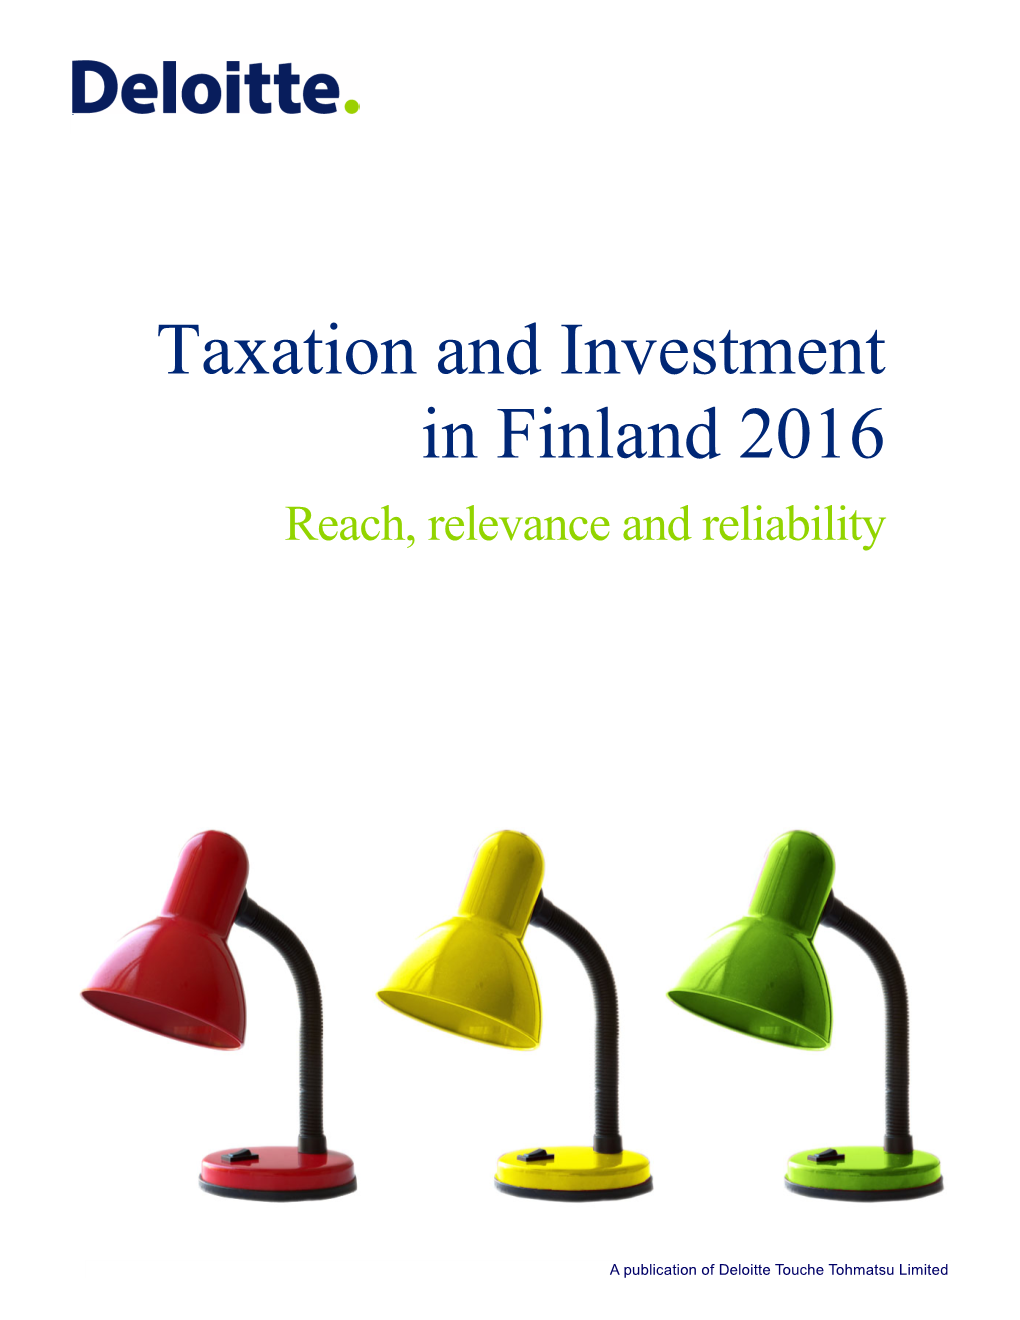 Taxation and Investment in Finland 2016 Reach, Relevance and Reliability